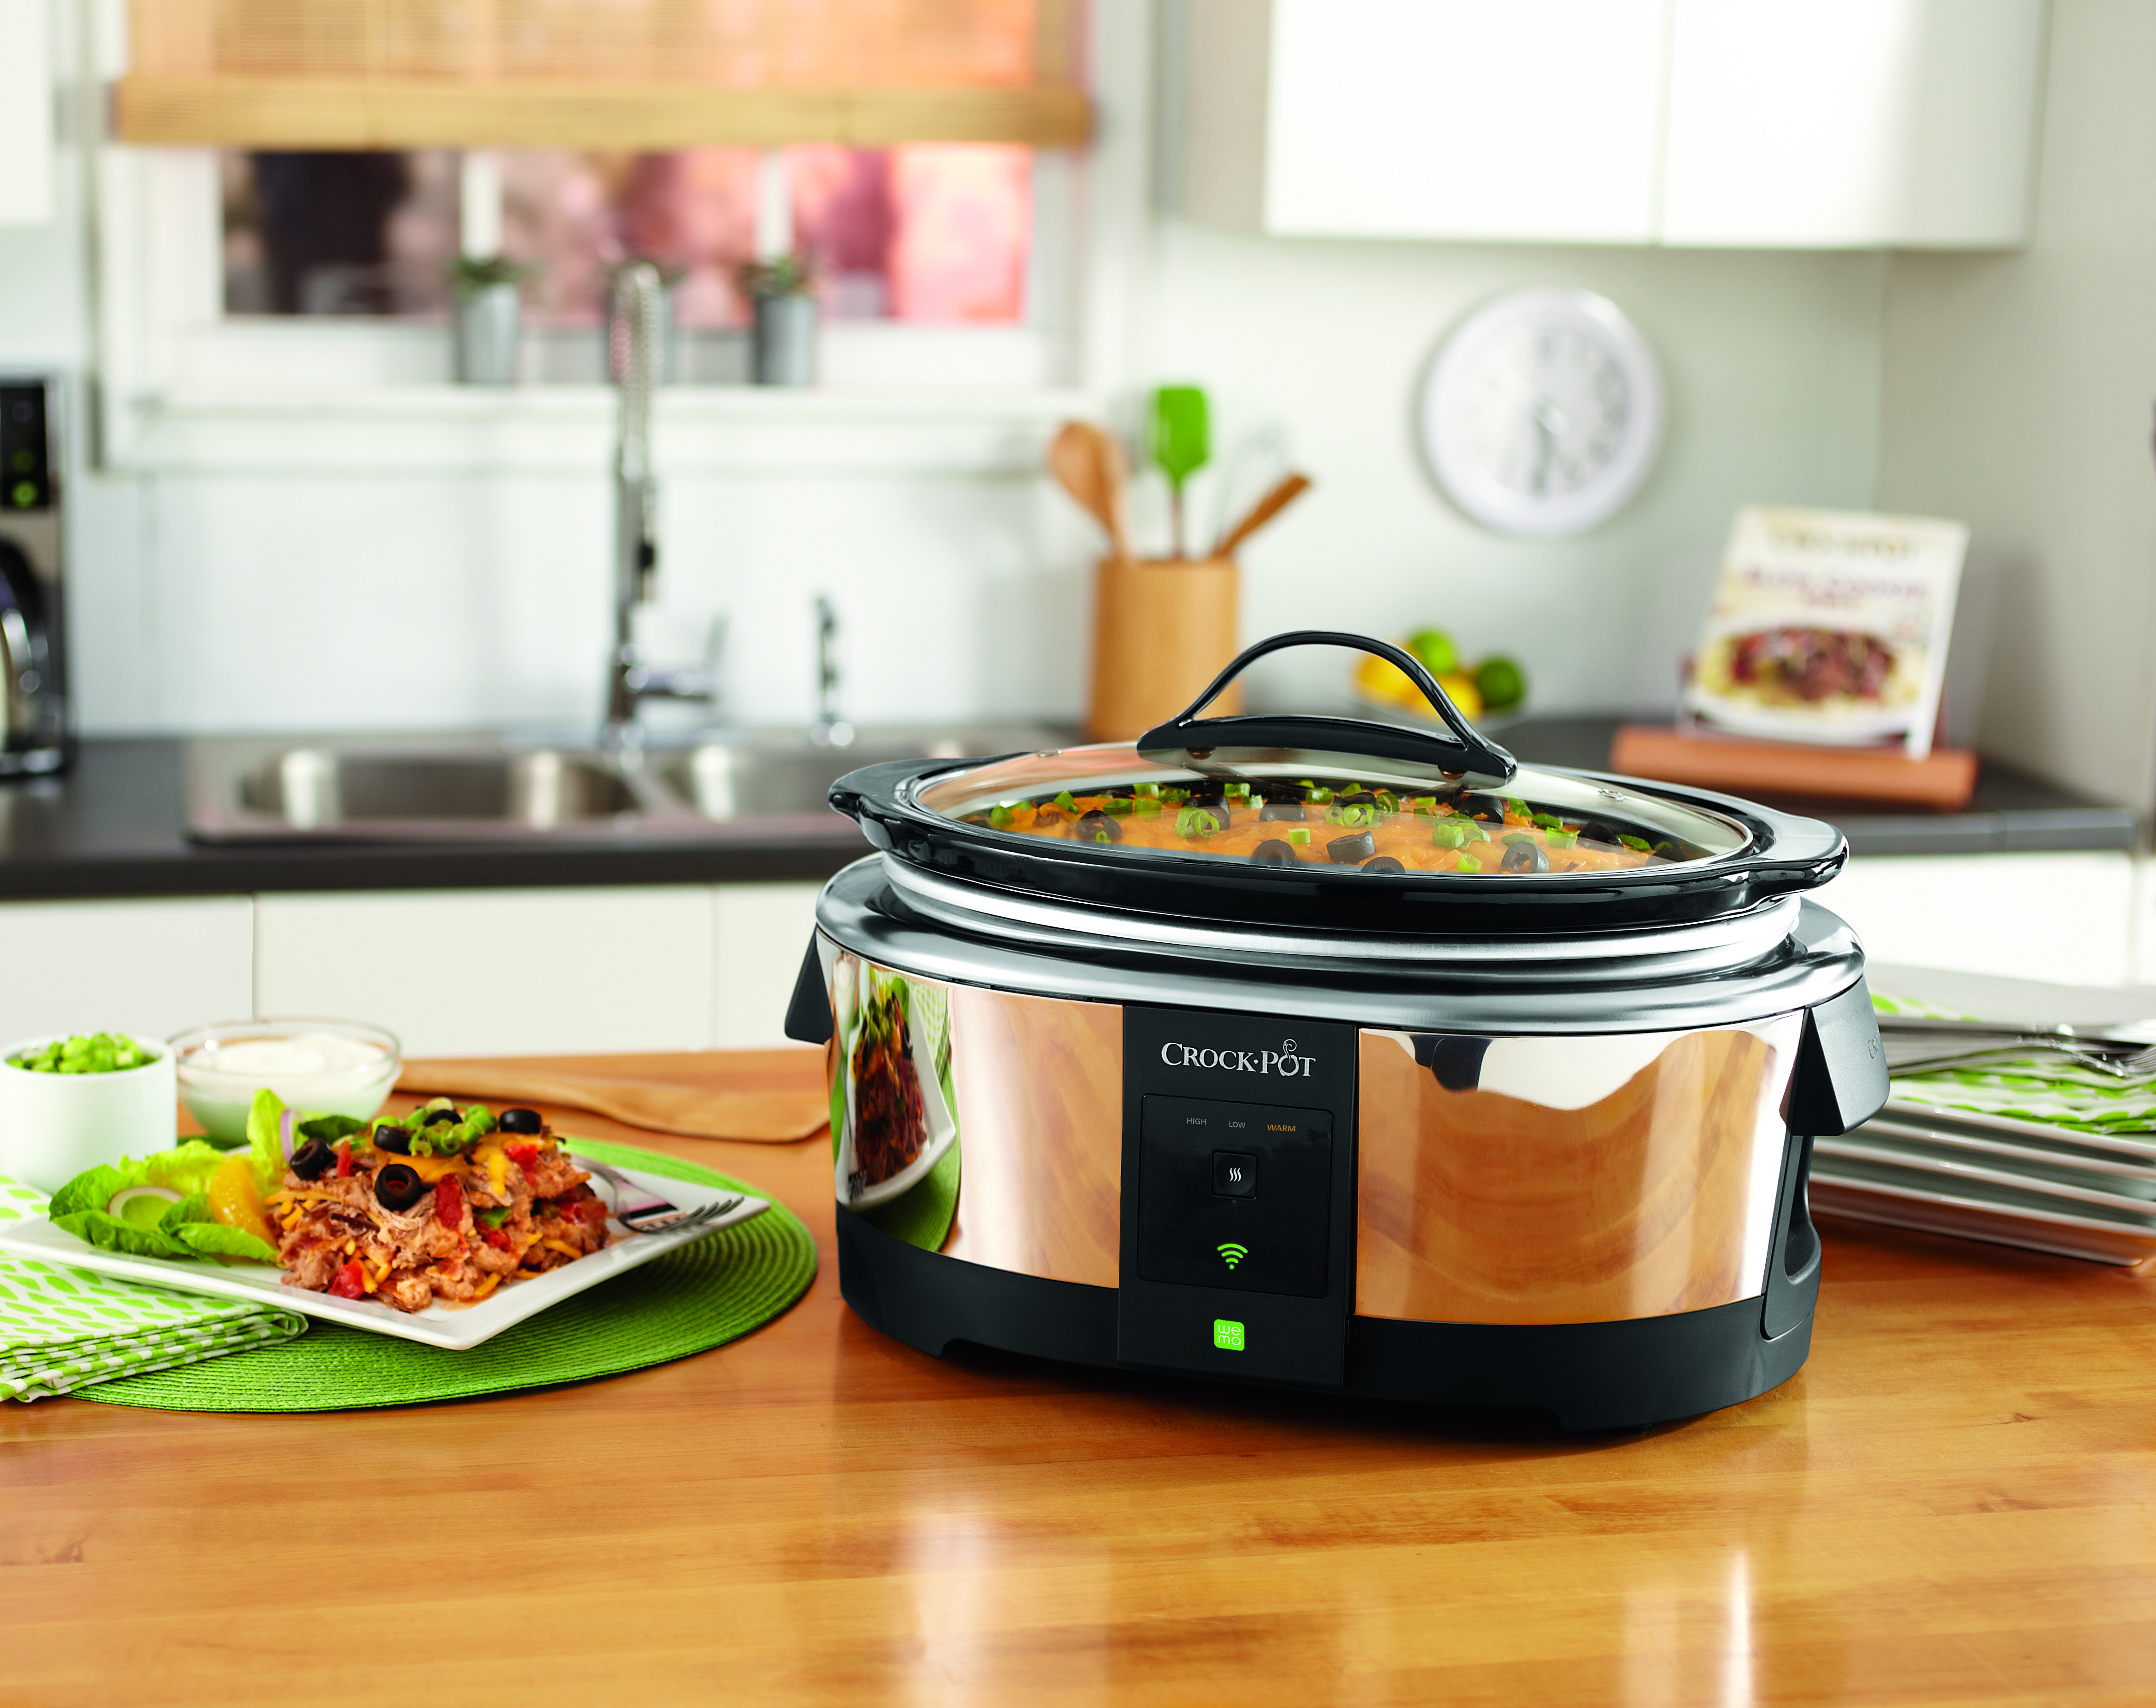 Crock-Pot Wifi-Controlled Smart Slow Cooker Enabled by WeMo, 6-Quart, Stainless Steel (SCCPWM600-V1) - image 5 of 8